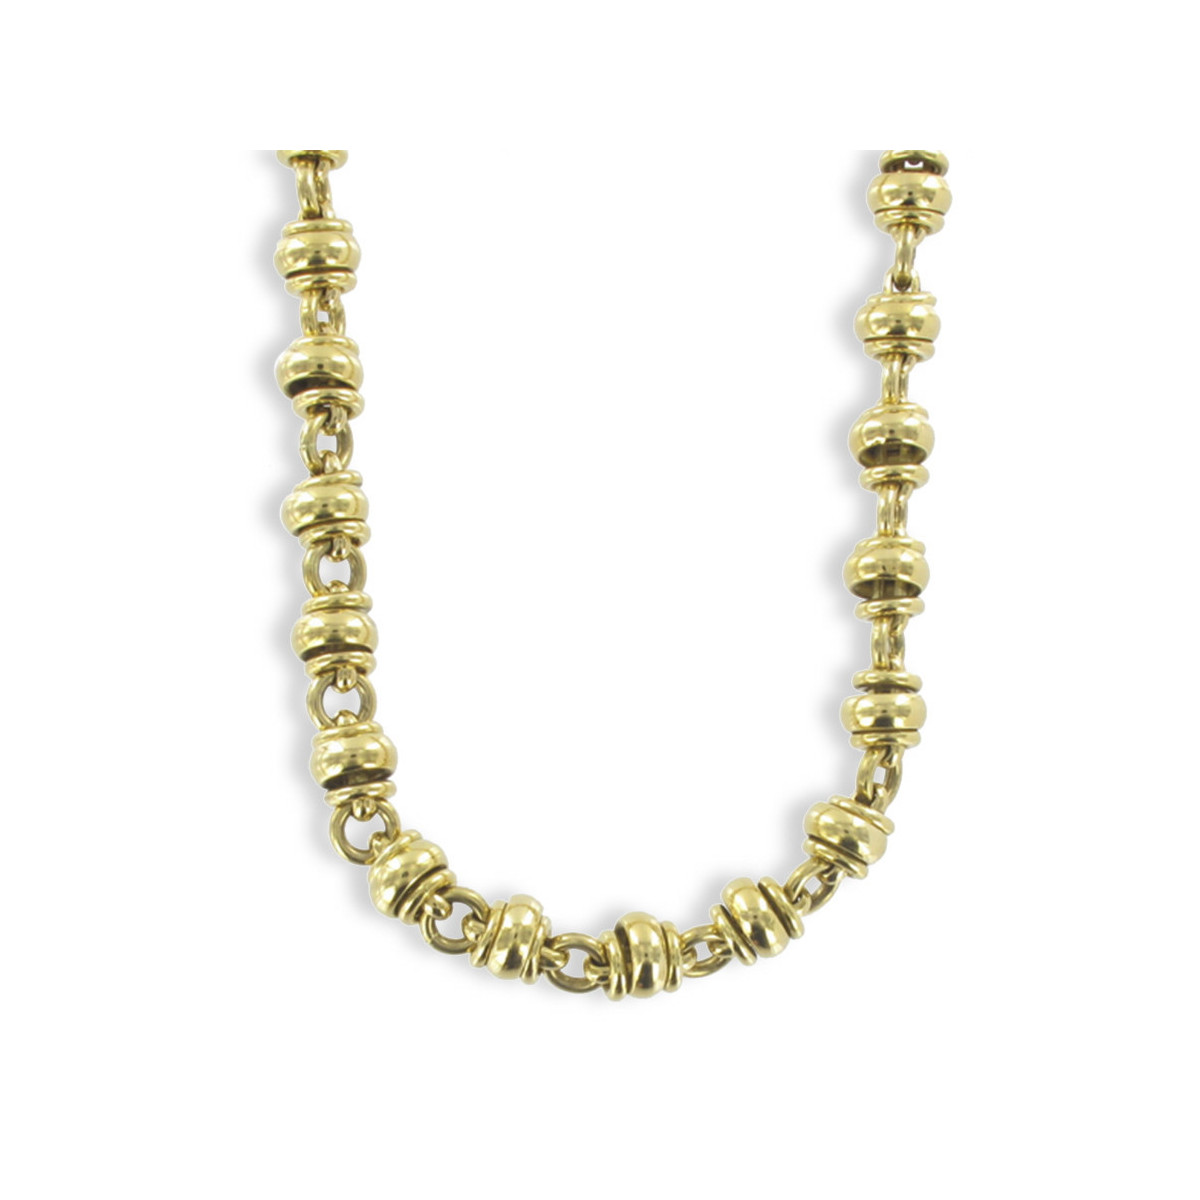 GOLD NECKLACE 83 GRAMS